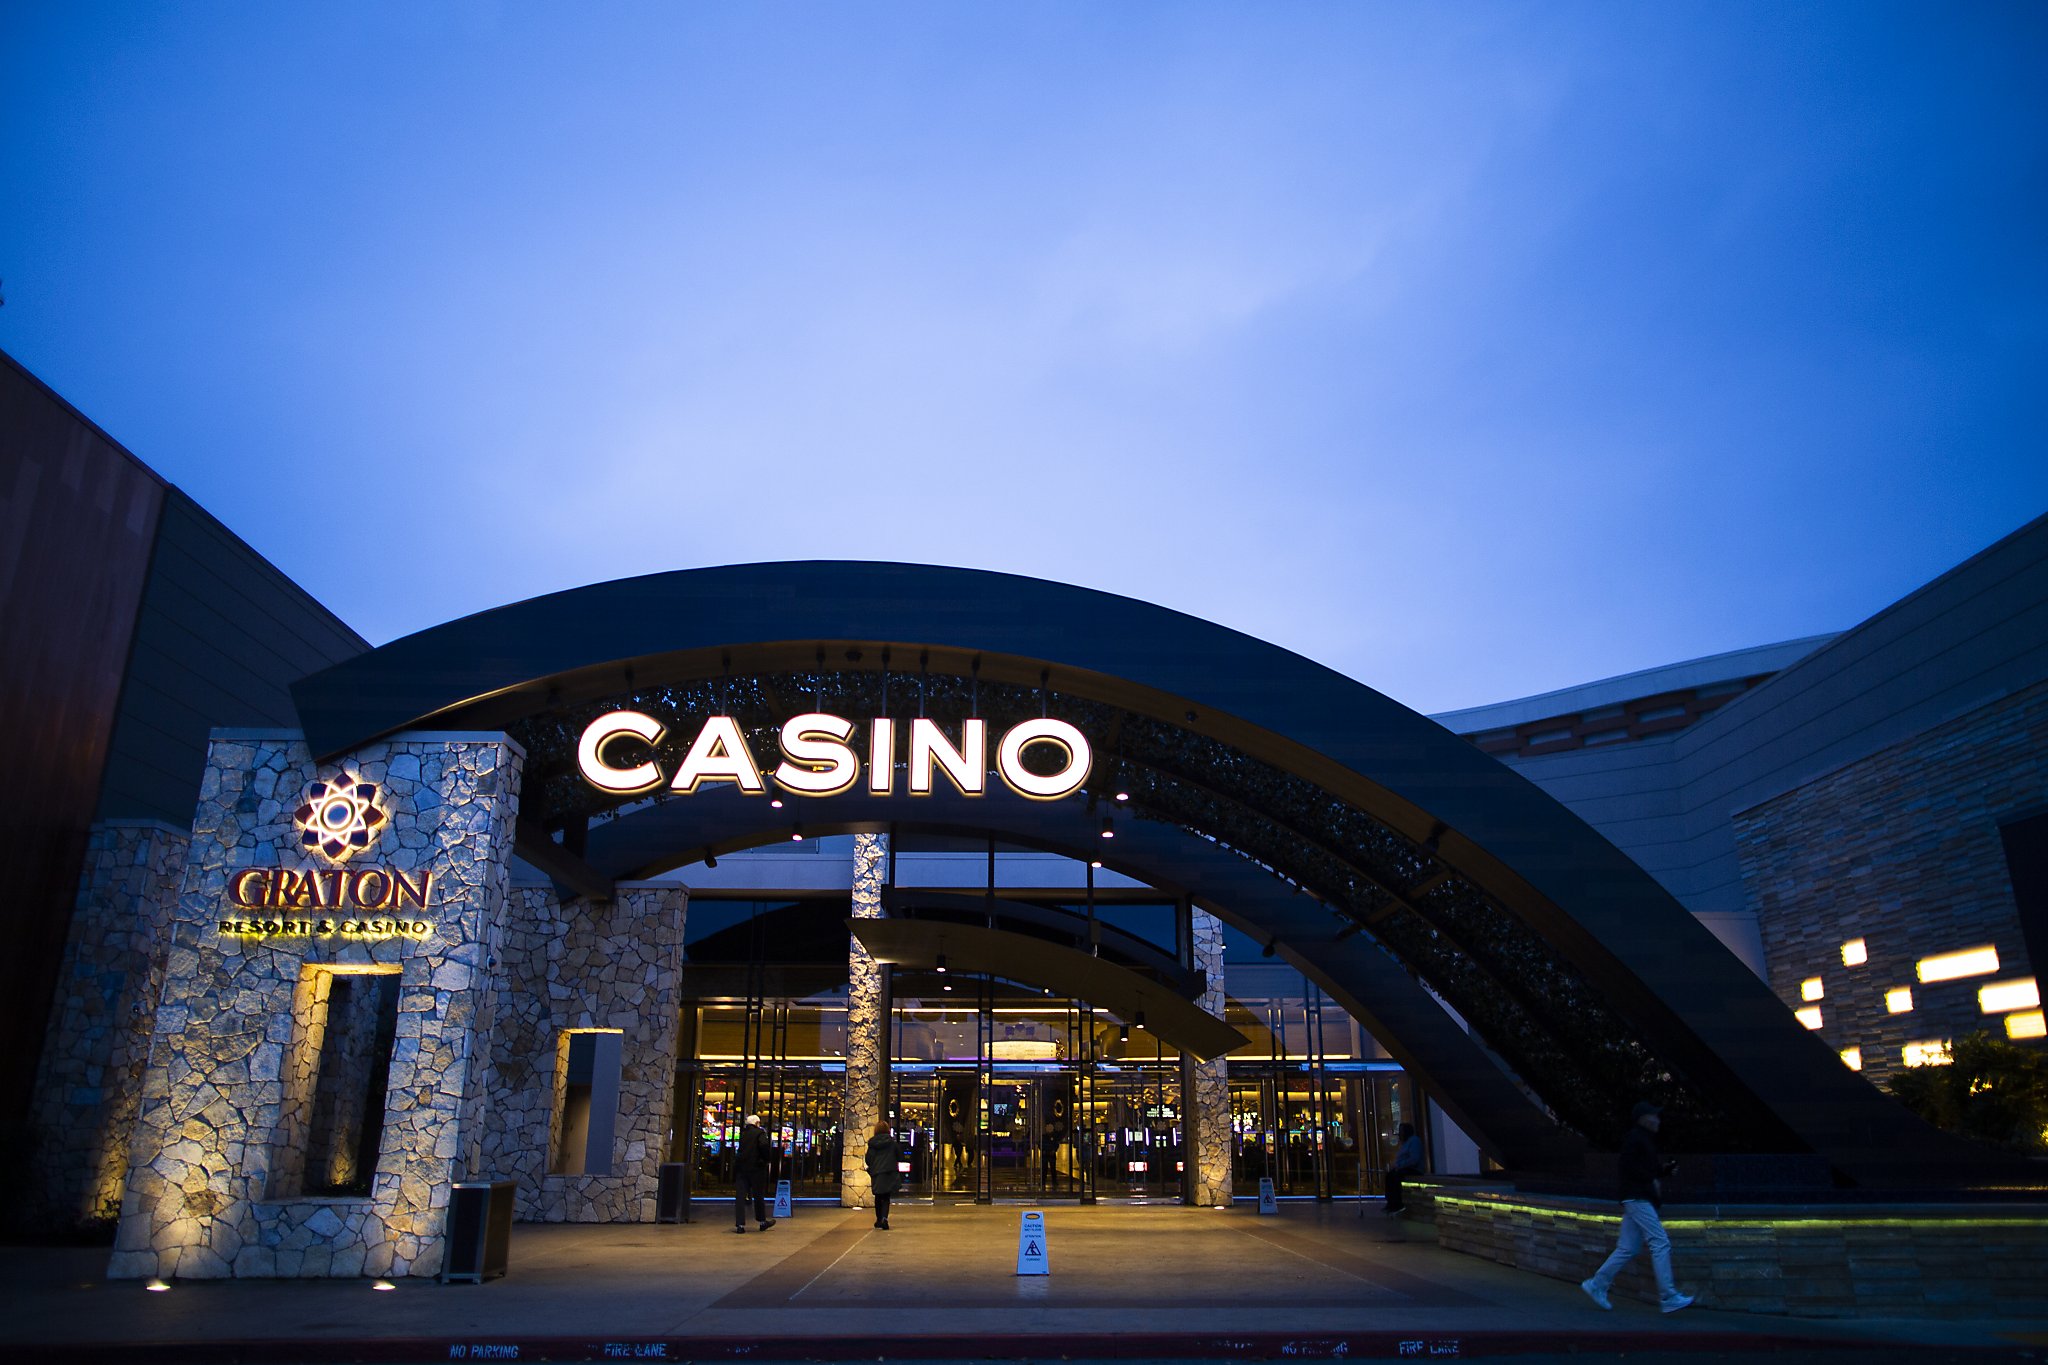 Best paying casinos in california for lunch